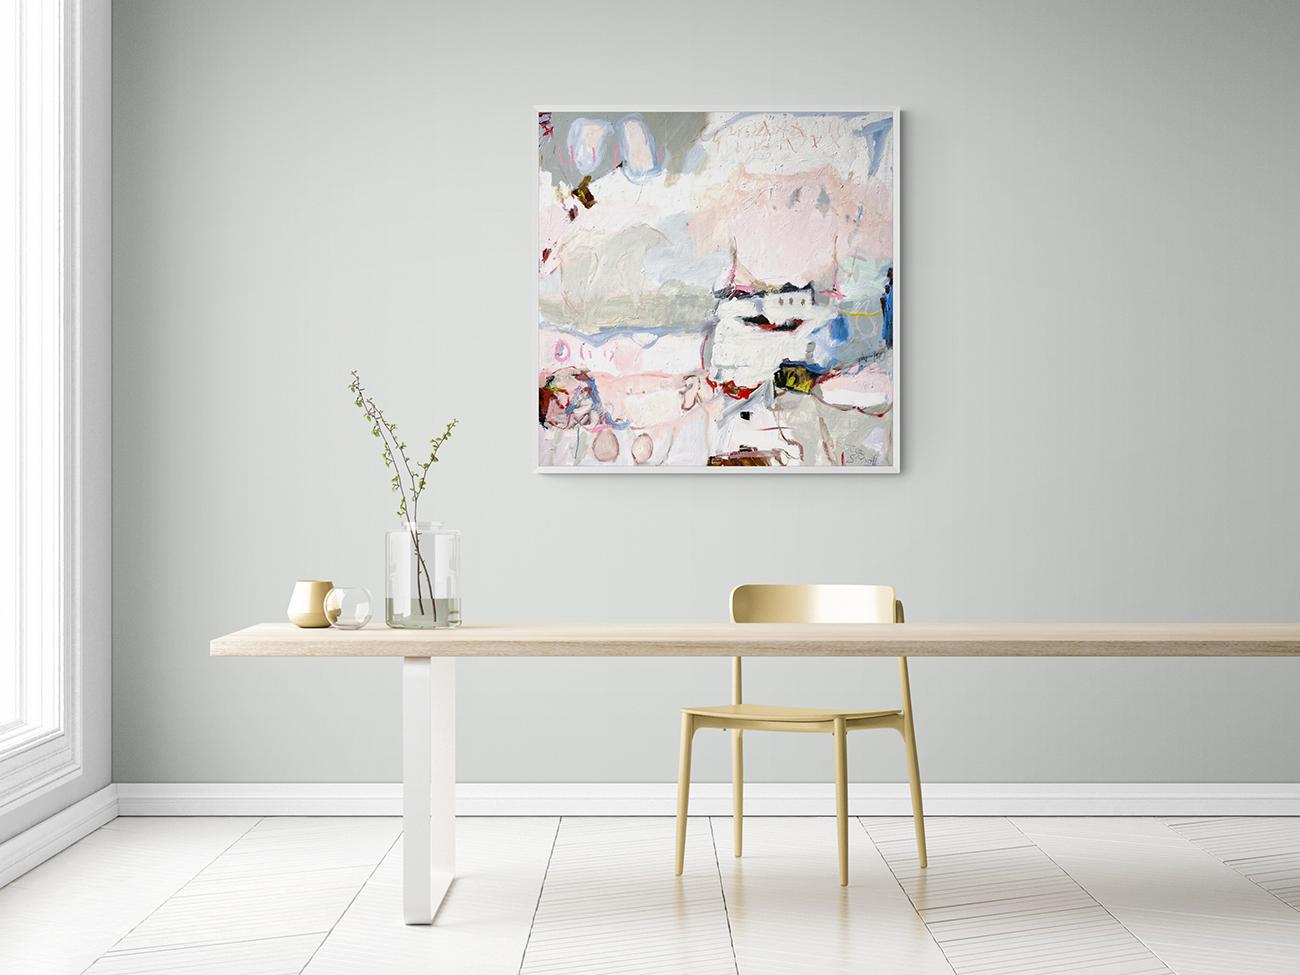 Childhood Pleasures (Abstract painting)
Oil on canvas — Unframed.
This artwork is exclusive to IdeelArt.

German artist Petra Schott uses colour, lines, and shapes to express her everyday emotions on canvas. During her creative process, she takes